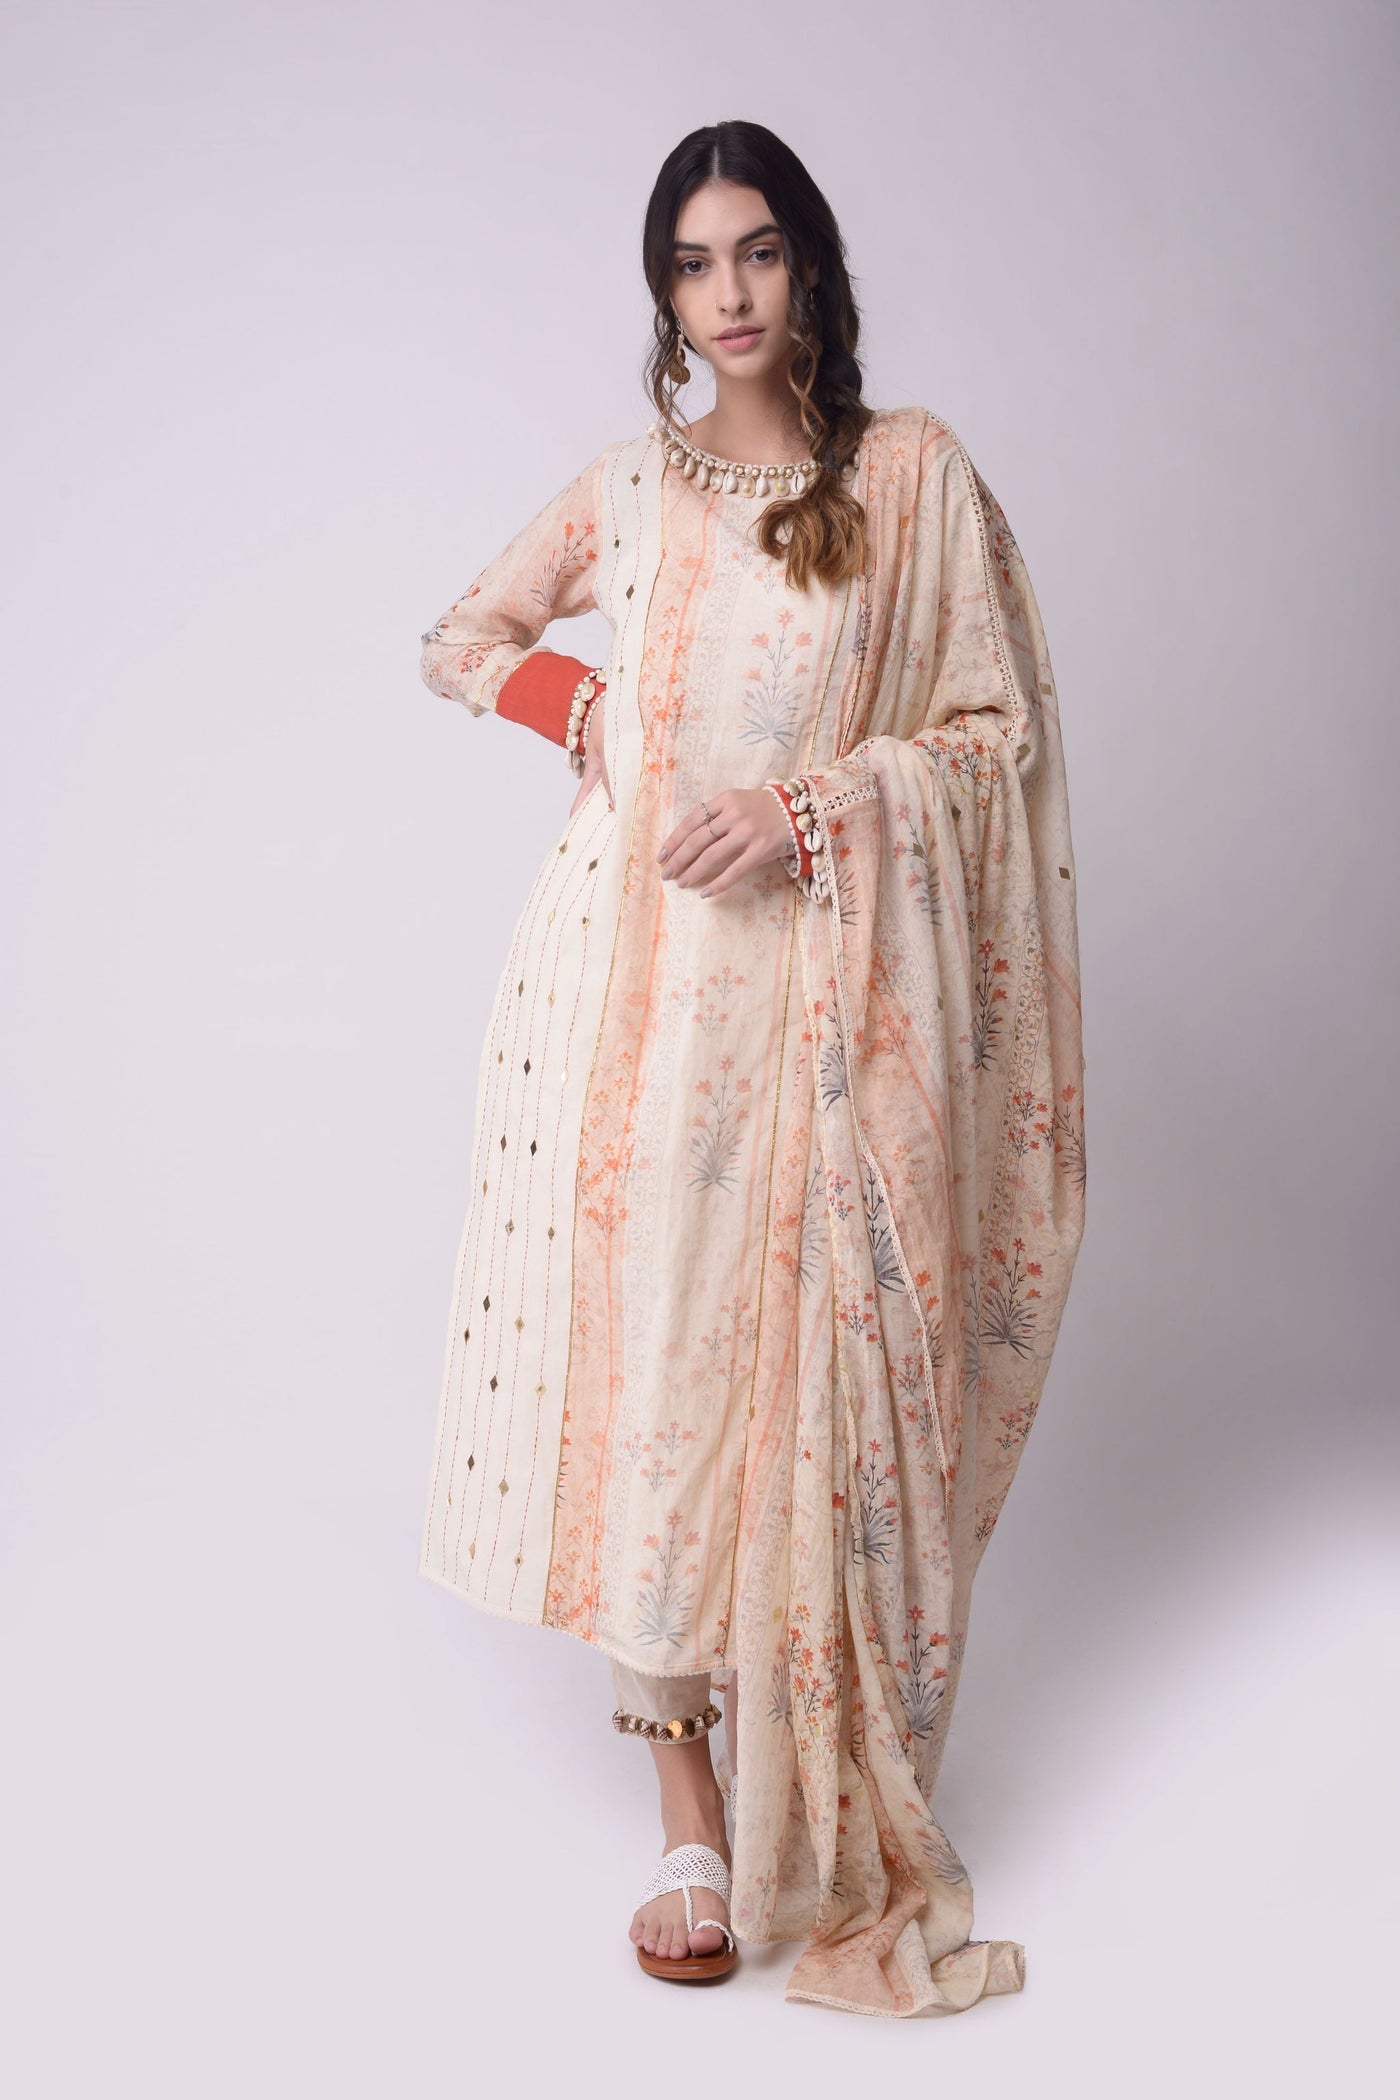 Ivory straight kurta set - Indian Clothing in Denver, CO, Aurora, CO, Boulder, CO, Fort Collins, CO, Colorado Springs, CO, Parker, CO, Highlands Ranch, CO, Cherry Creek, CO, Centennial, CO, and Longmont, CO. Nationwide shipping USA - India Fashion X